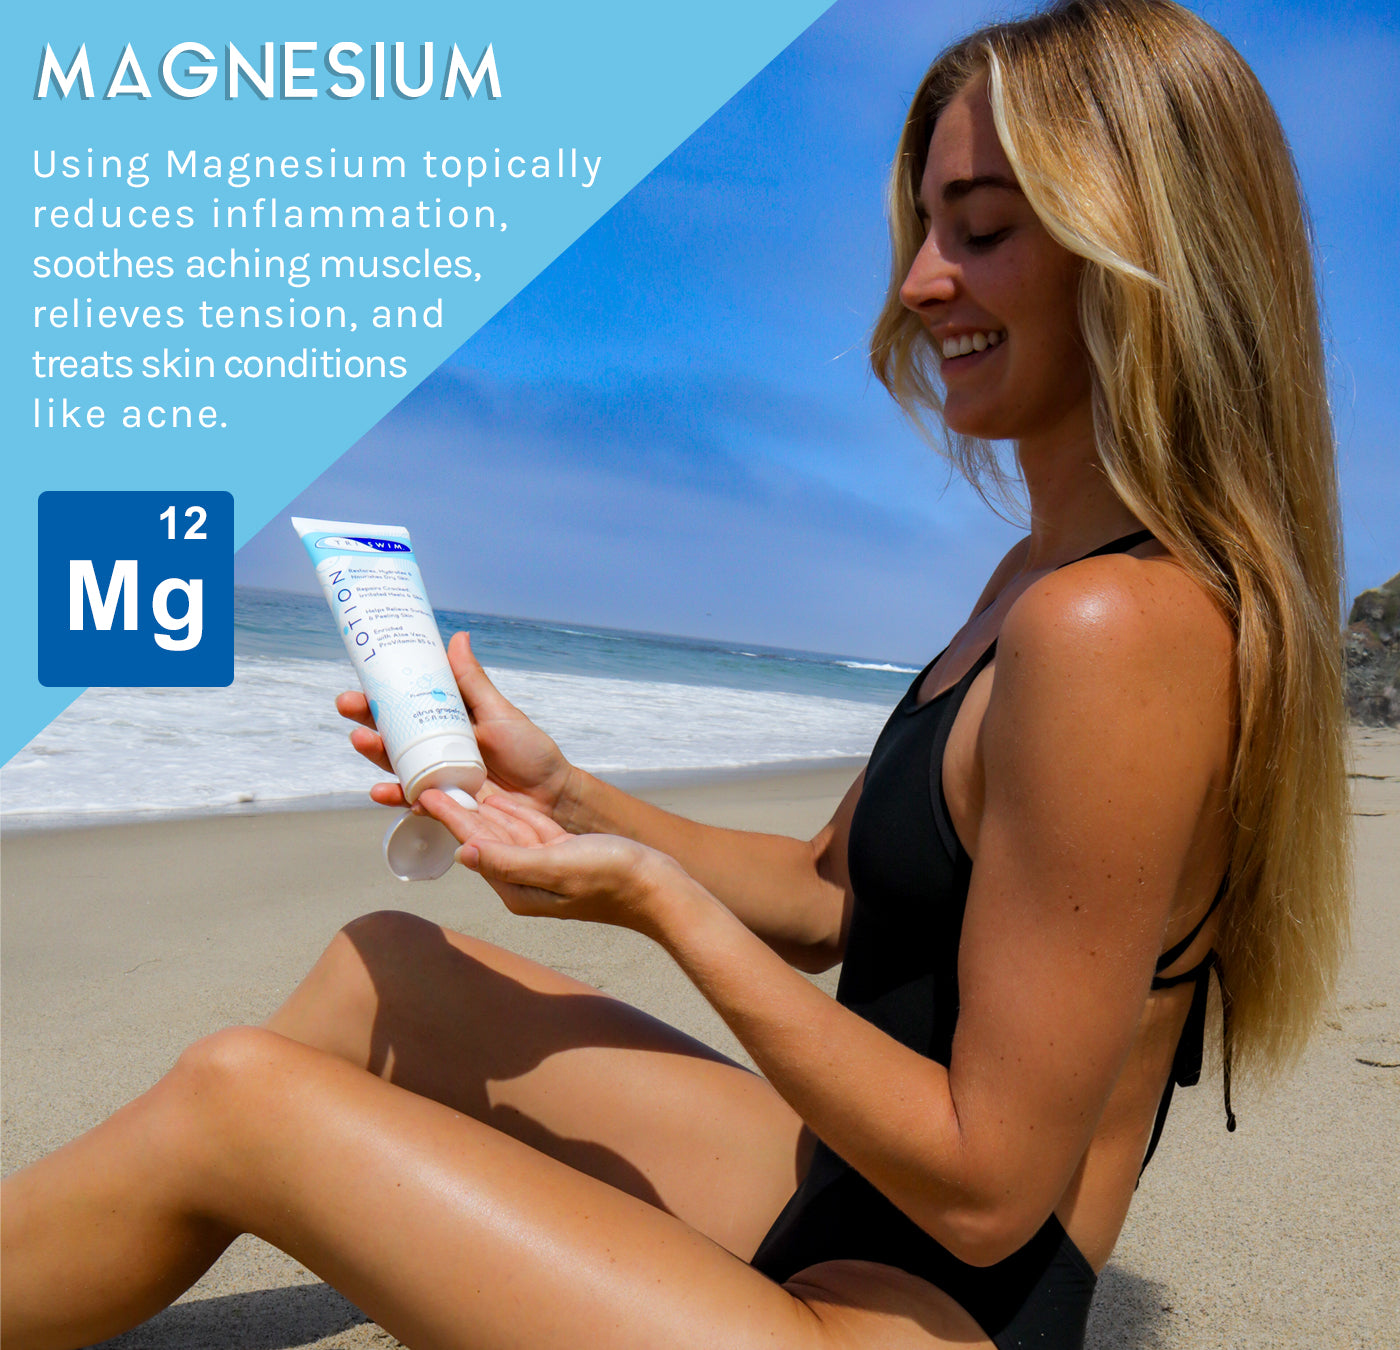 TRISWIM Lotion contains magnesium which reduces inflammation, soothes aching muscles and treats acne